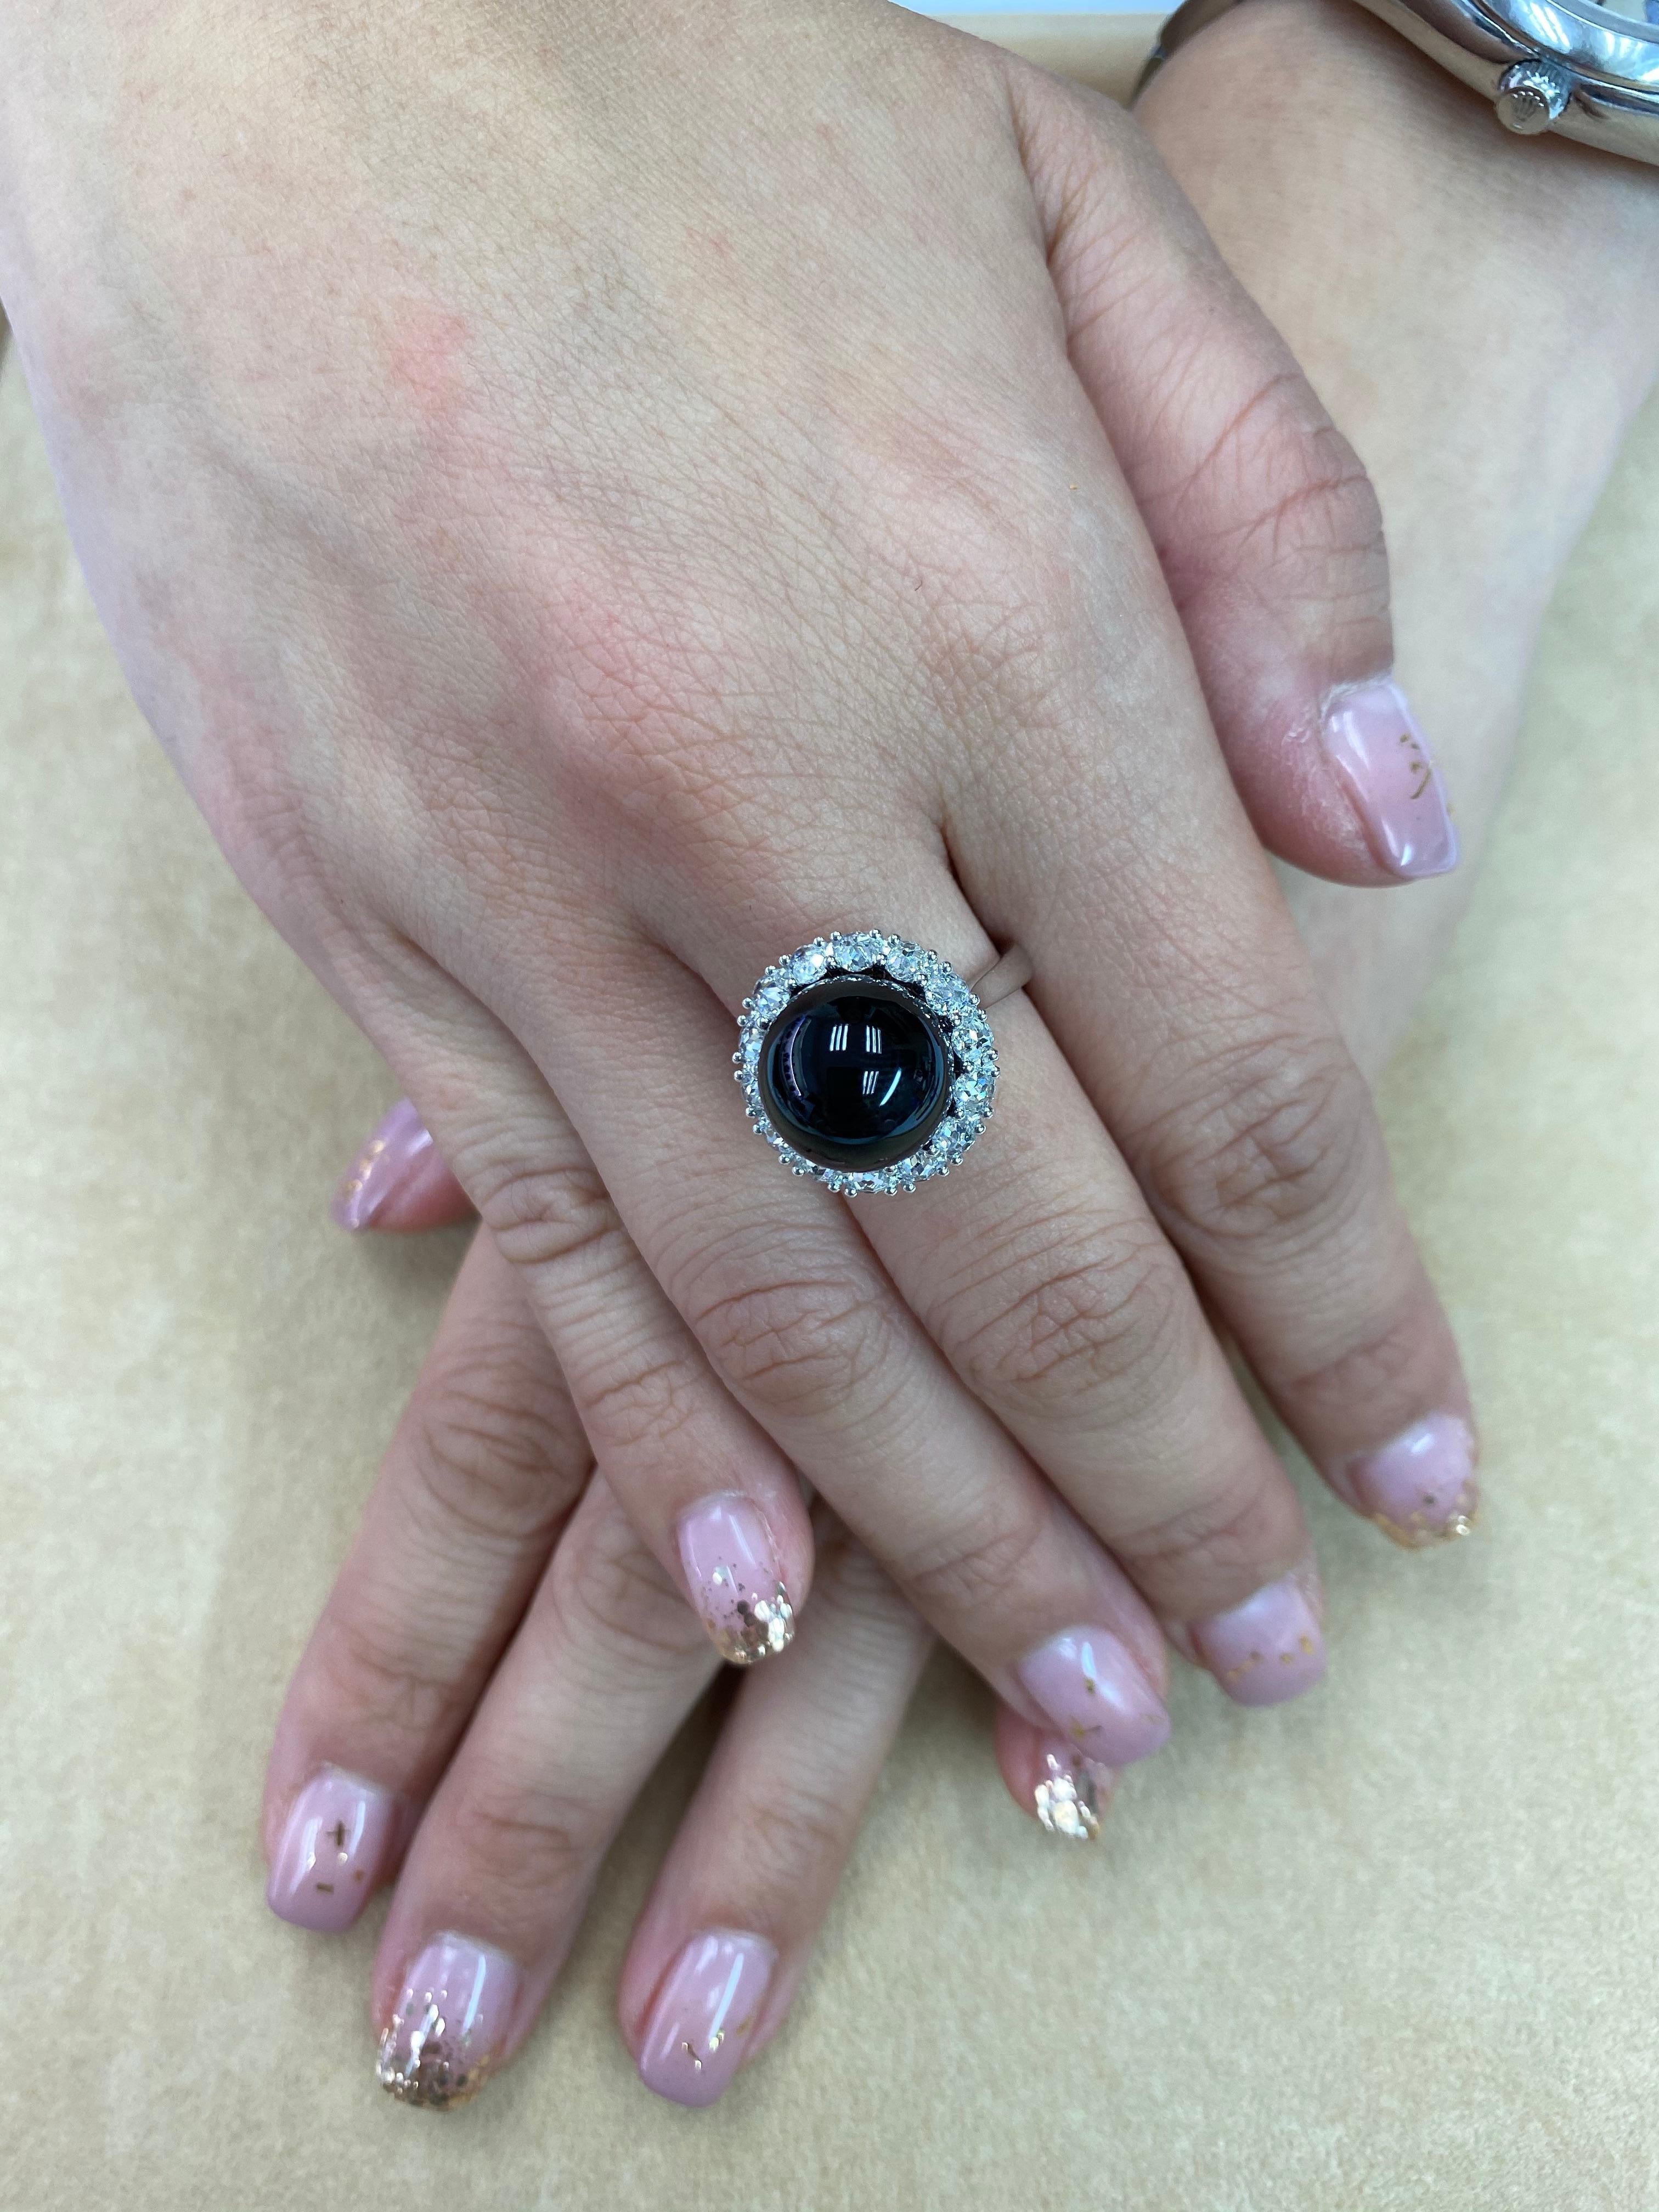 Please check out the HD video! Here is a beautiful Onyx and true antique rose cut diamond ring. The ring is set in 18k white gold. The Onyx is 12mm in size and round. There are 14 authentic antique rose cut diamonds totaling 0.75Cts making up a halo